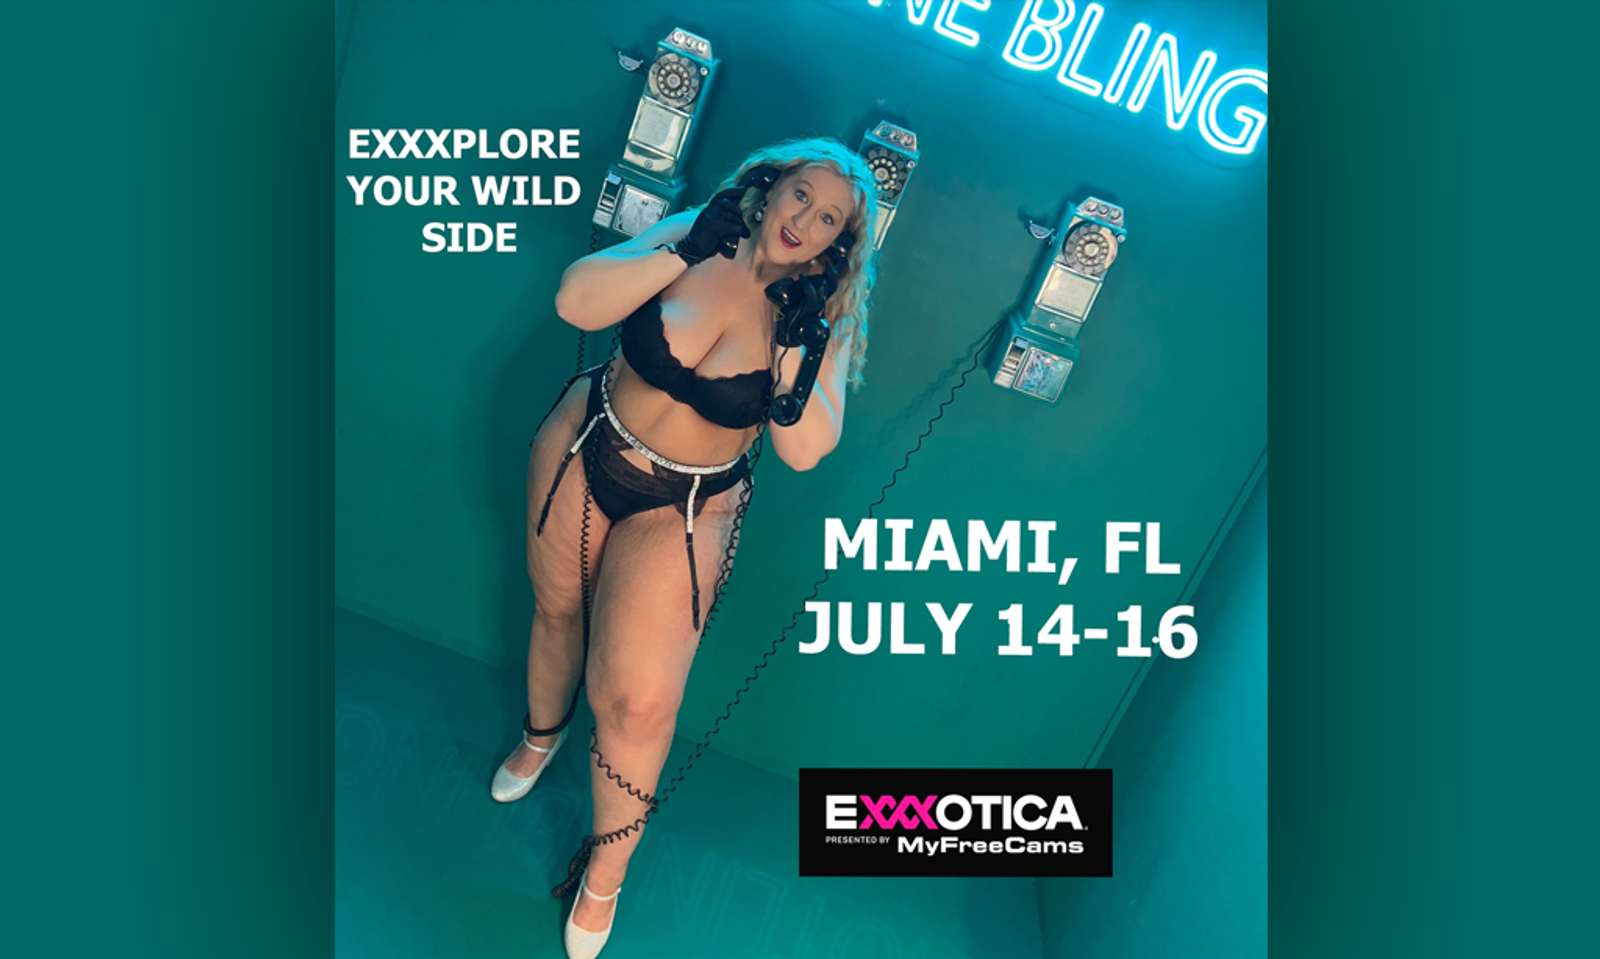 Ashlyn Sparks Set to Appear in Miami for Her First Exxxotica